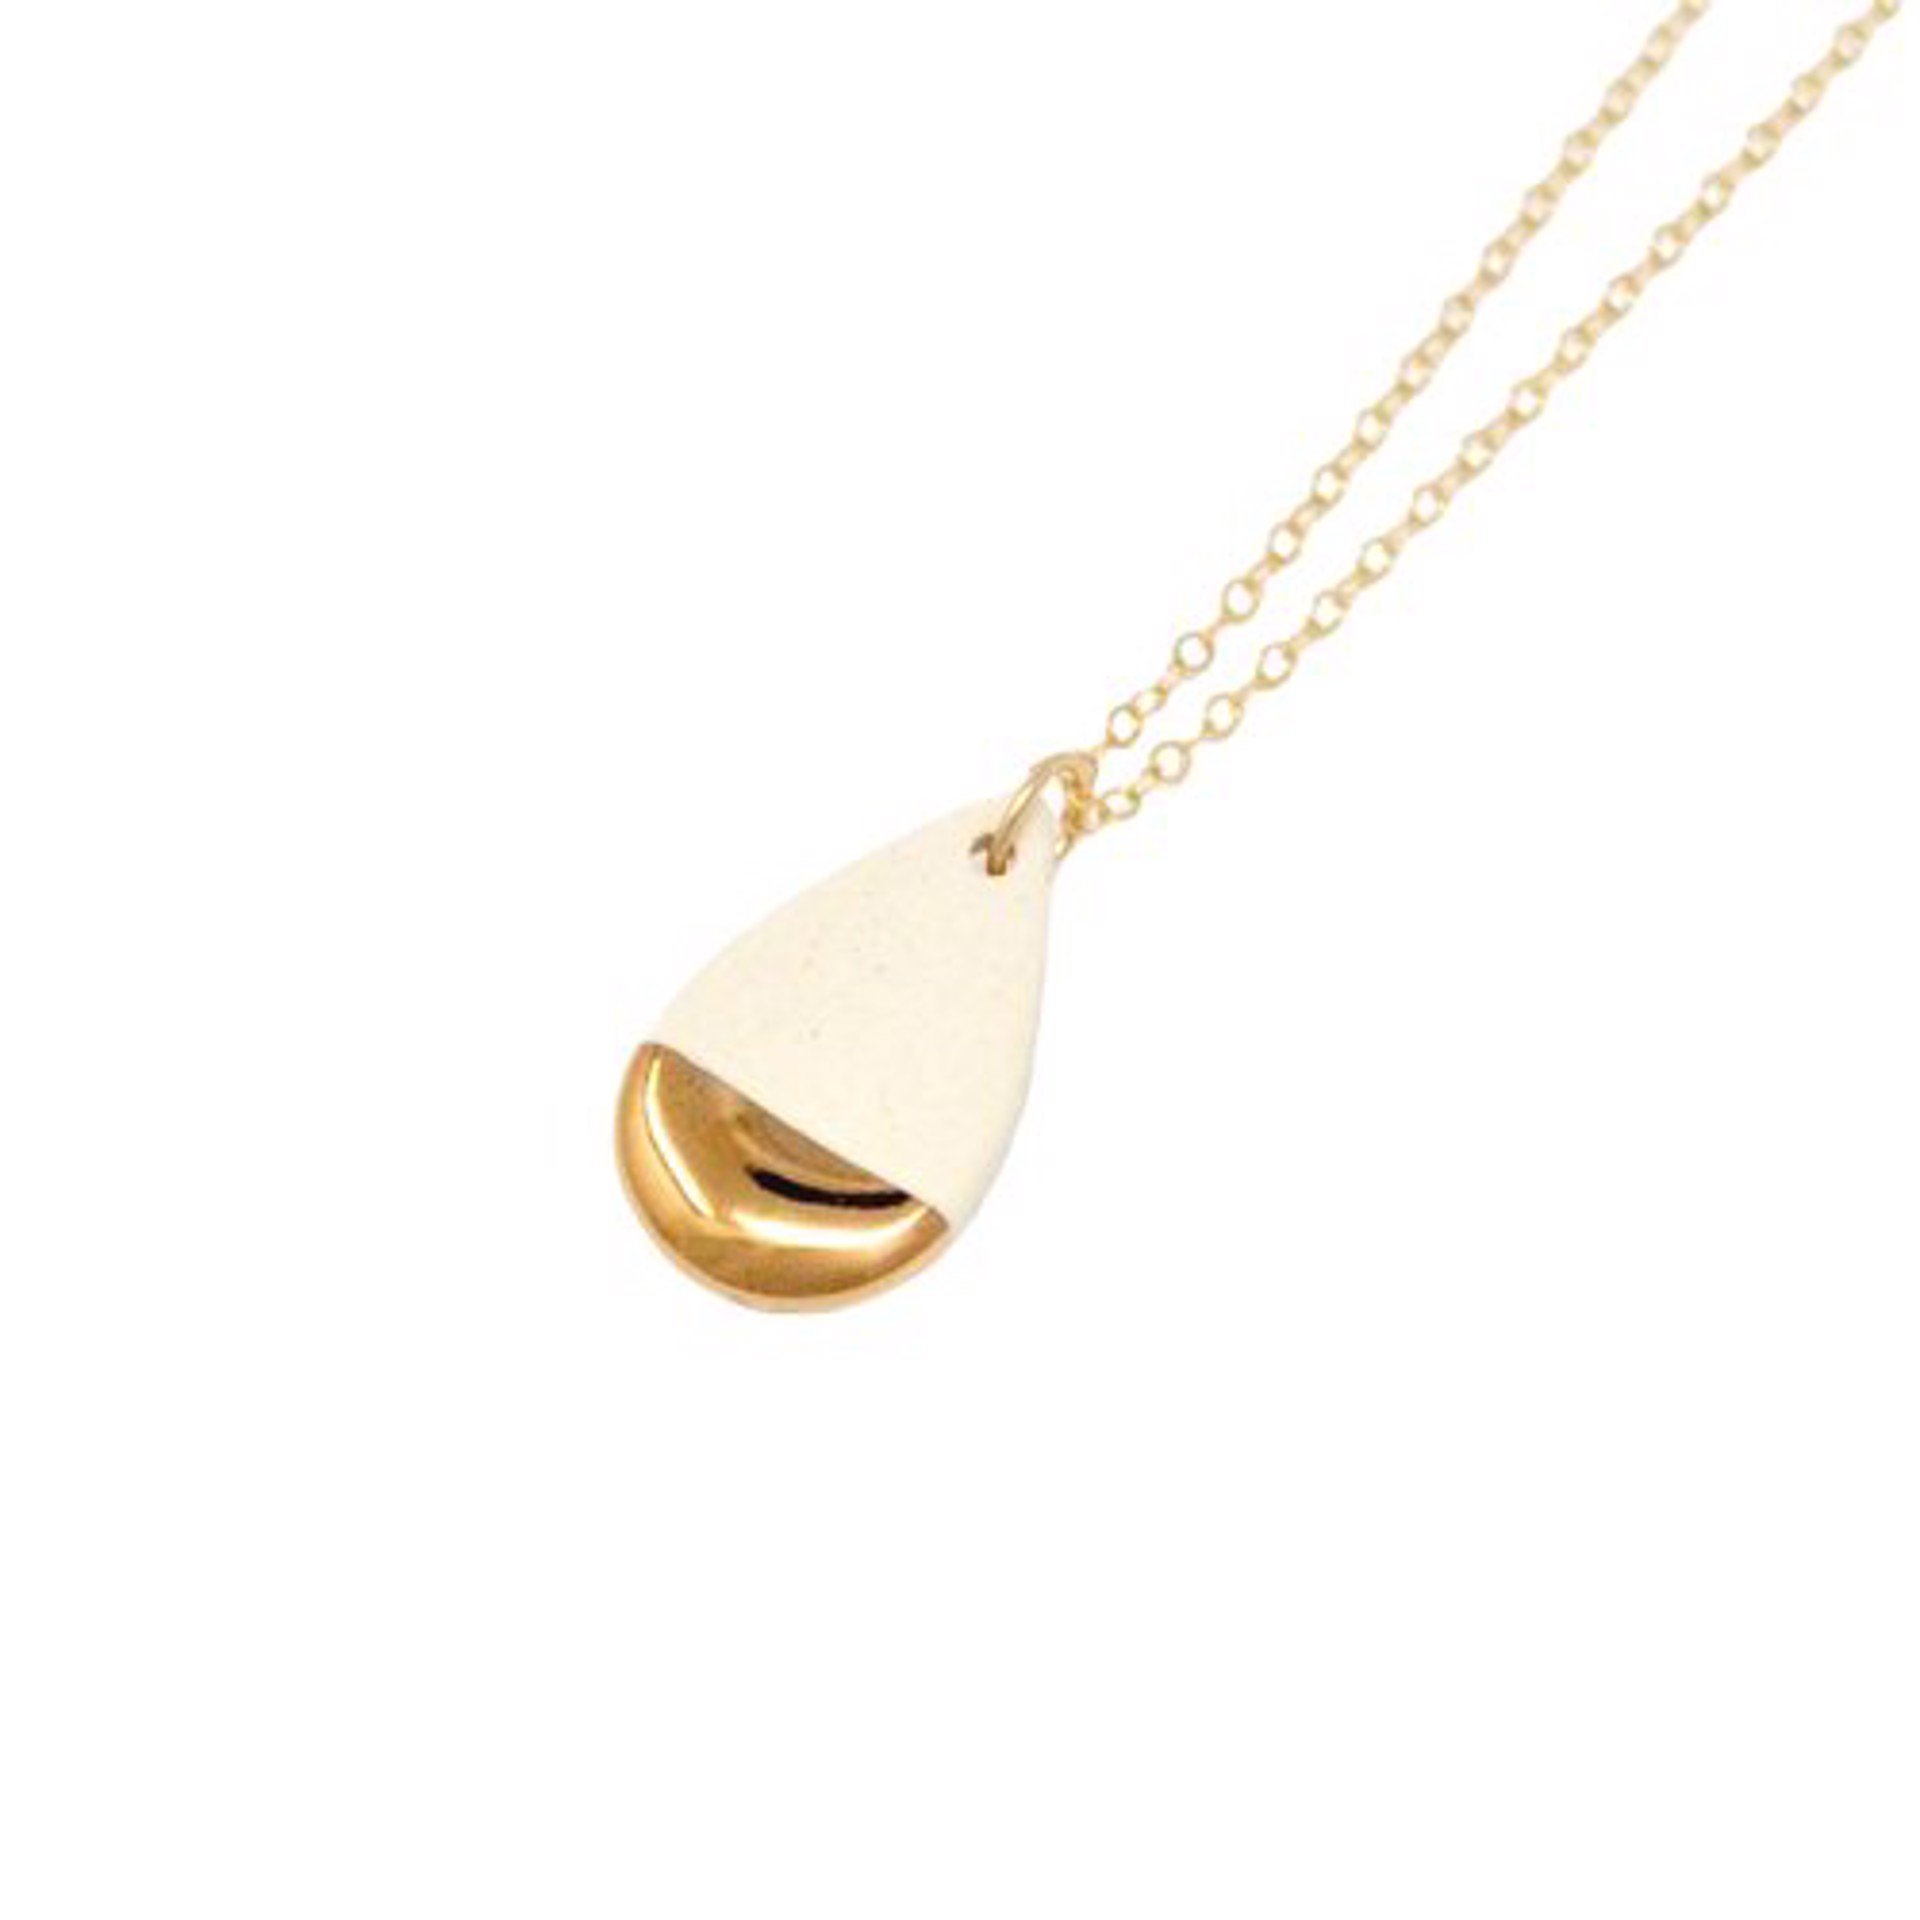 Teardrop Necklace - Teal/Gold Line by Zoe Comings